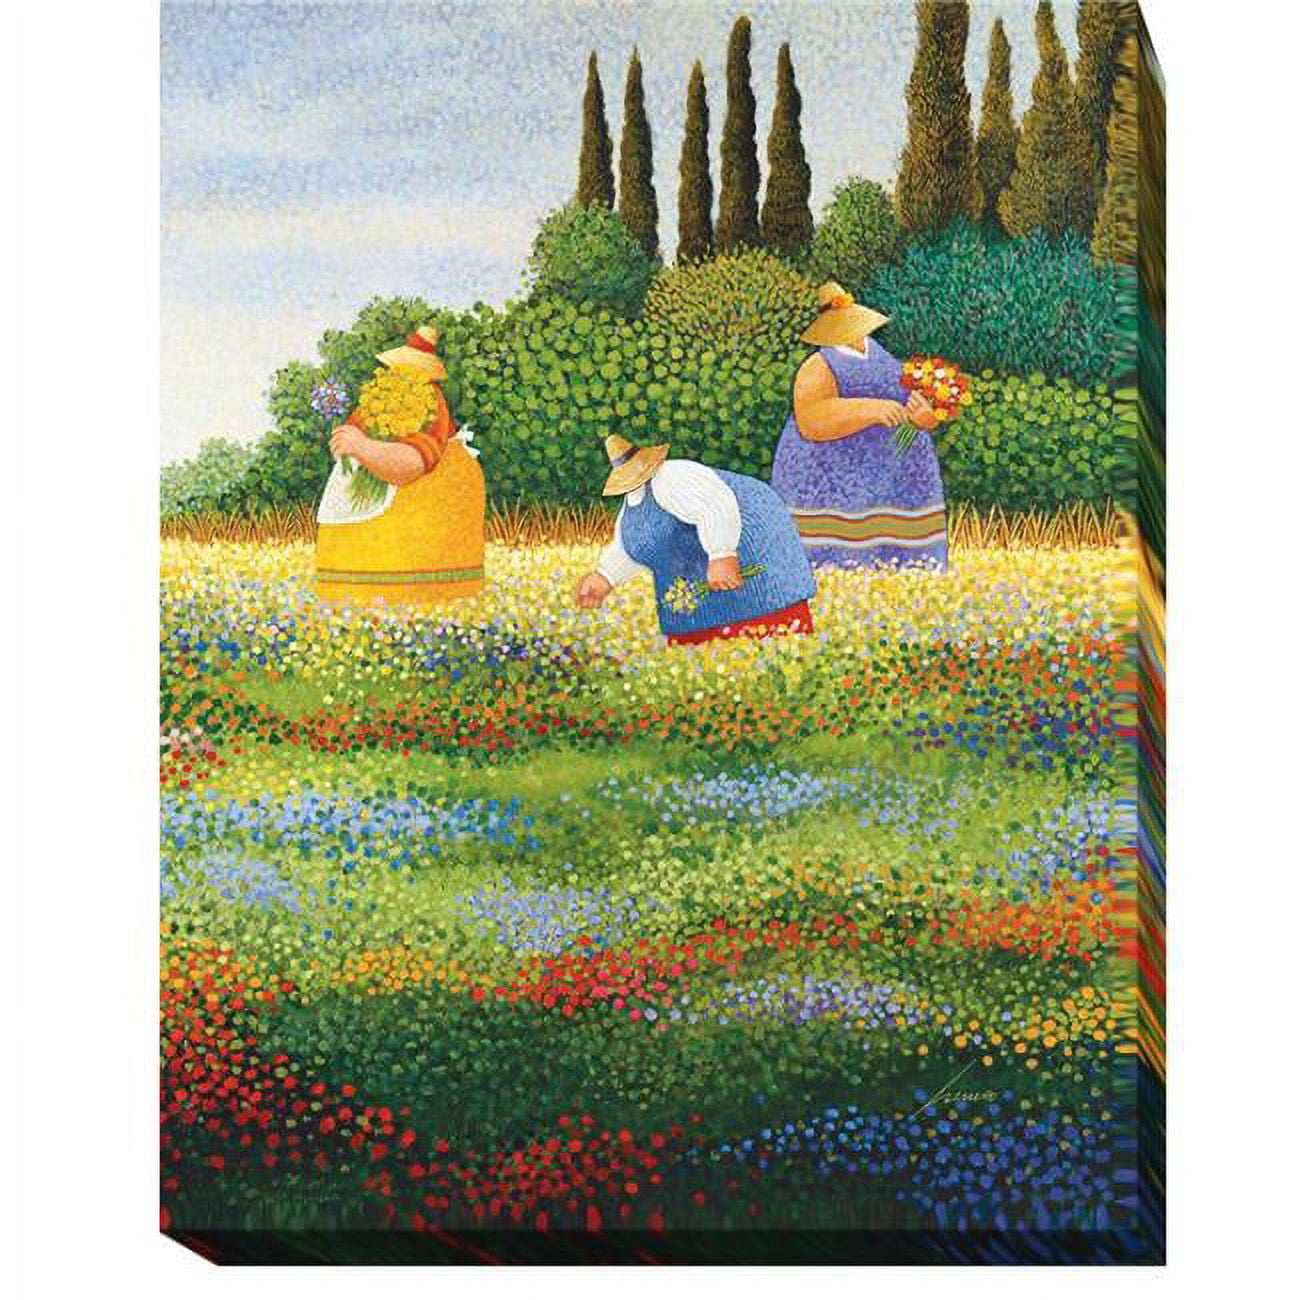 Picture of Artistic Home Gallery 1216N394IG Spring Gathering by Lowell Herrero Premium Gallery-Wrapped Canvas Giclee Art - 12 x 16 x 1.5 in.